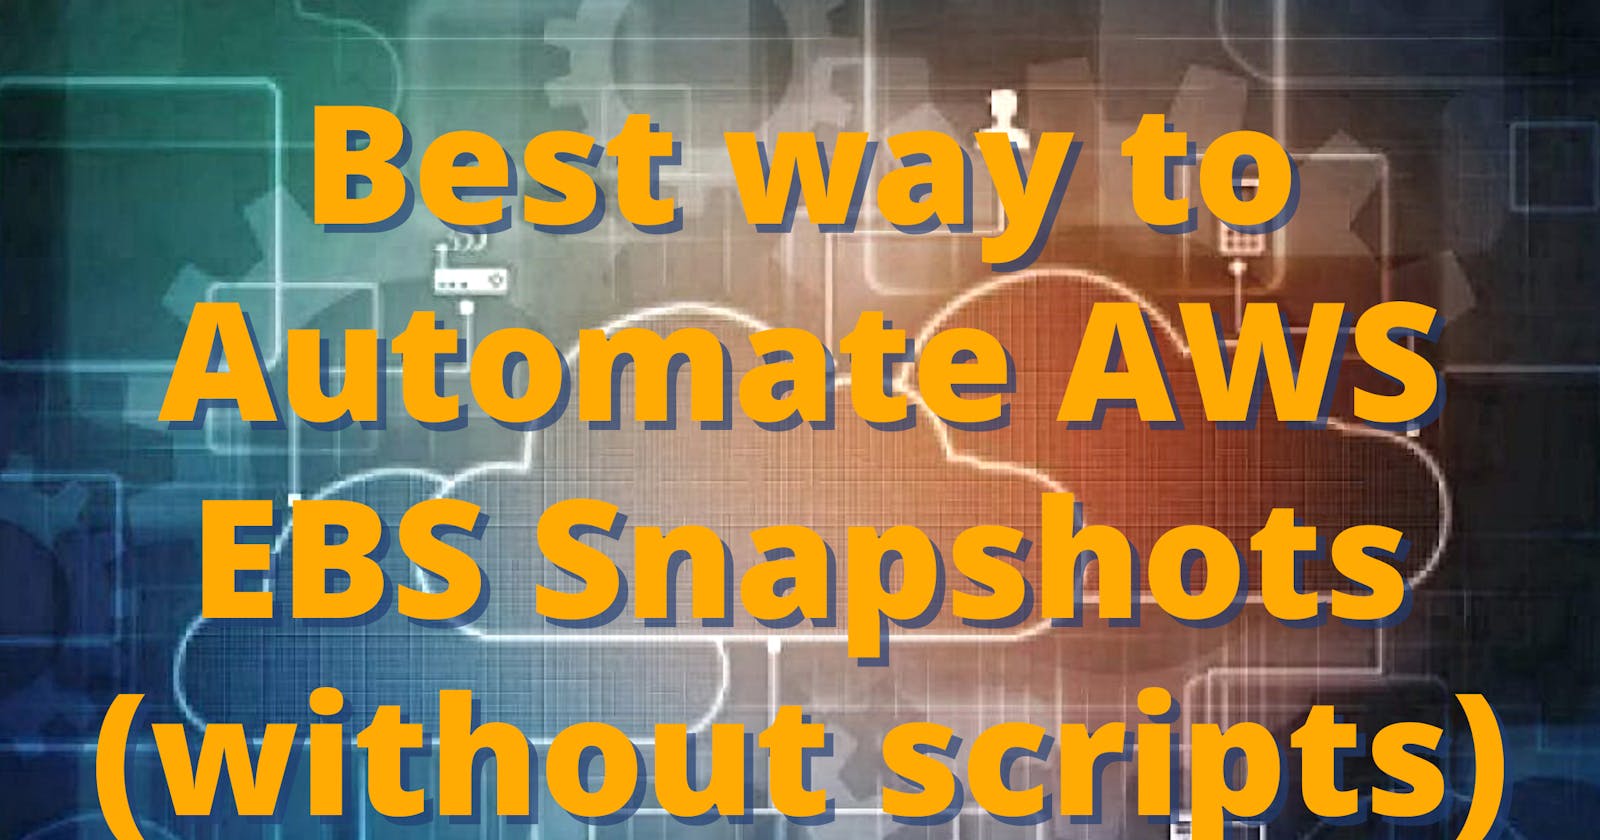 Best way to Automate AWS EBS Snapshots (without scripts)